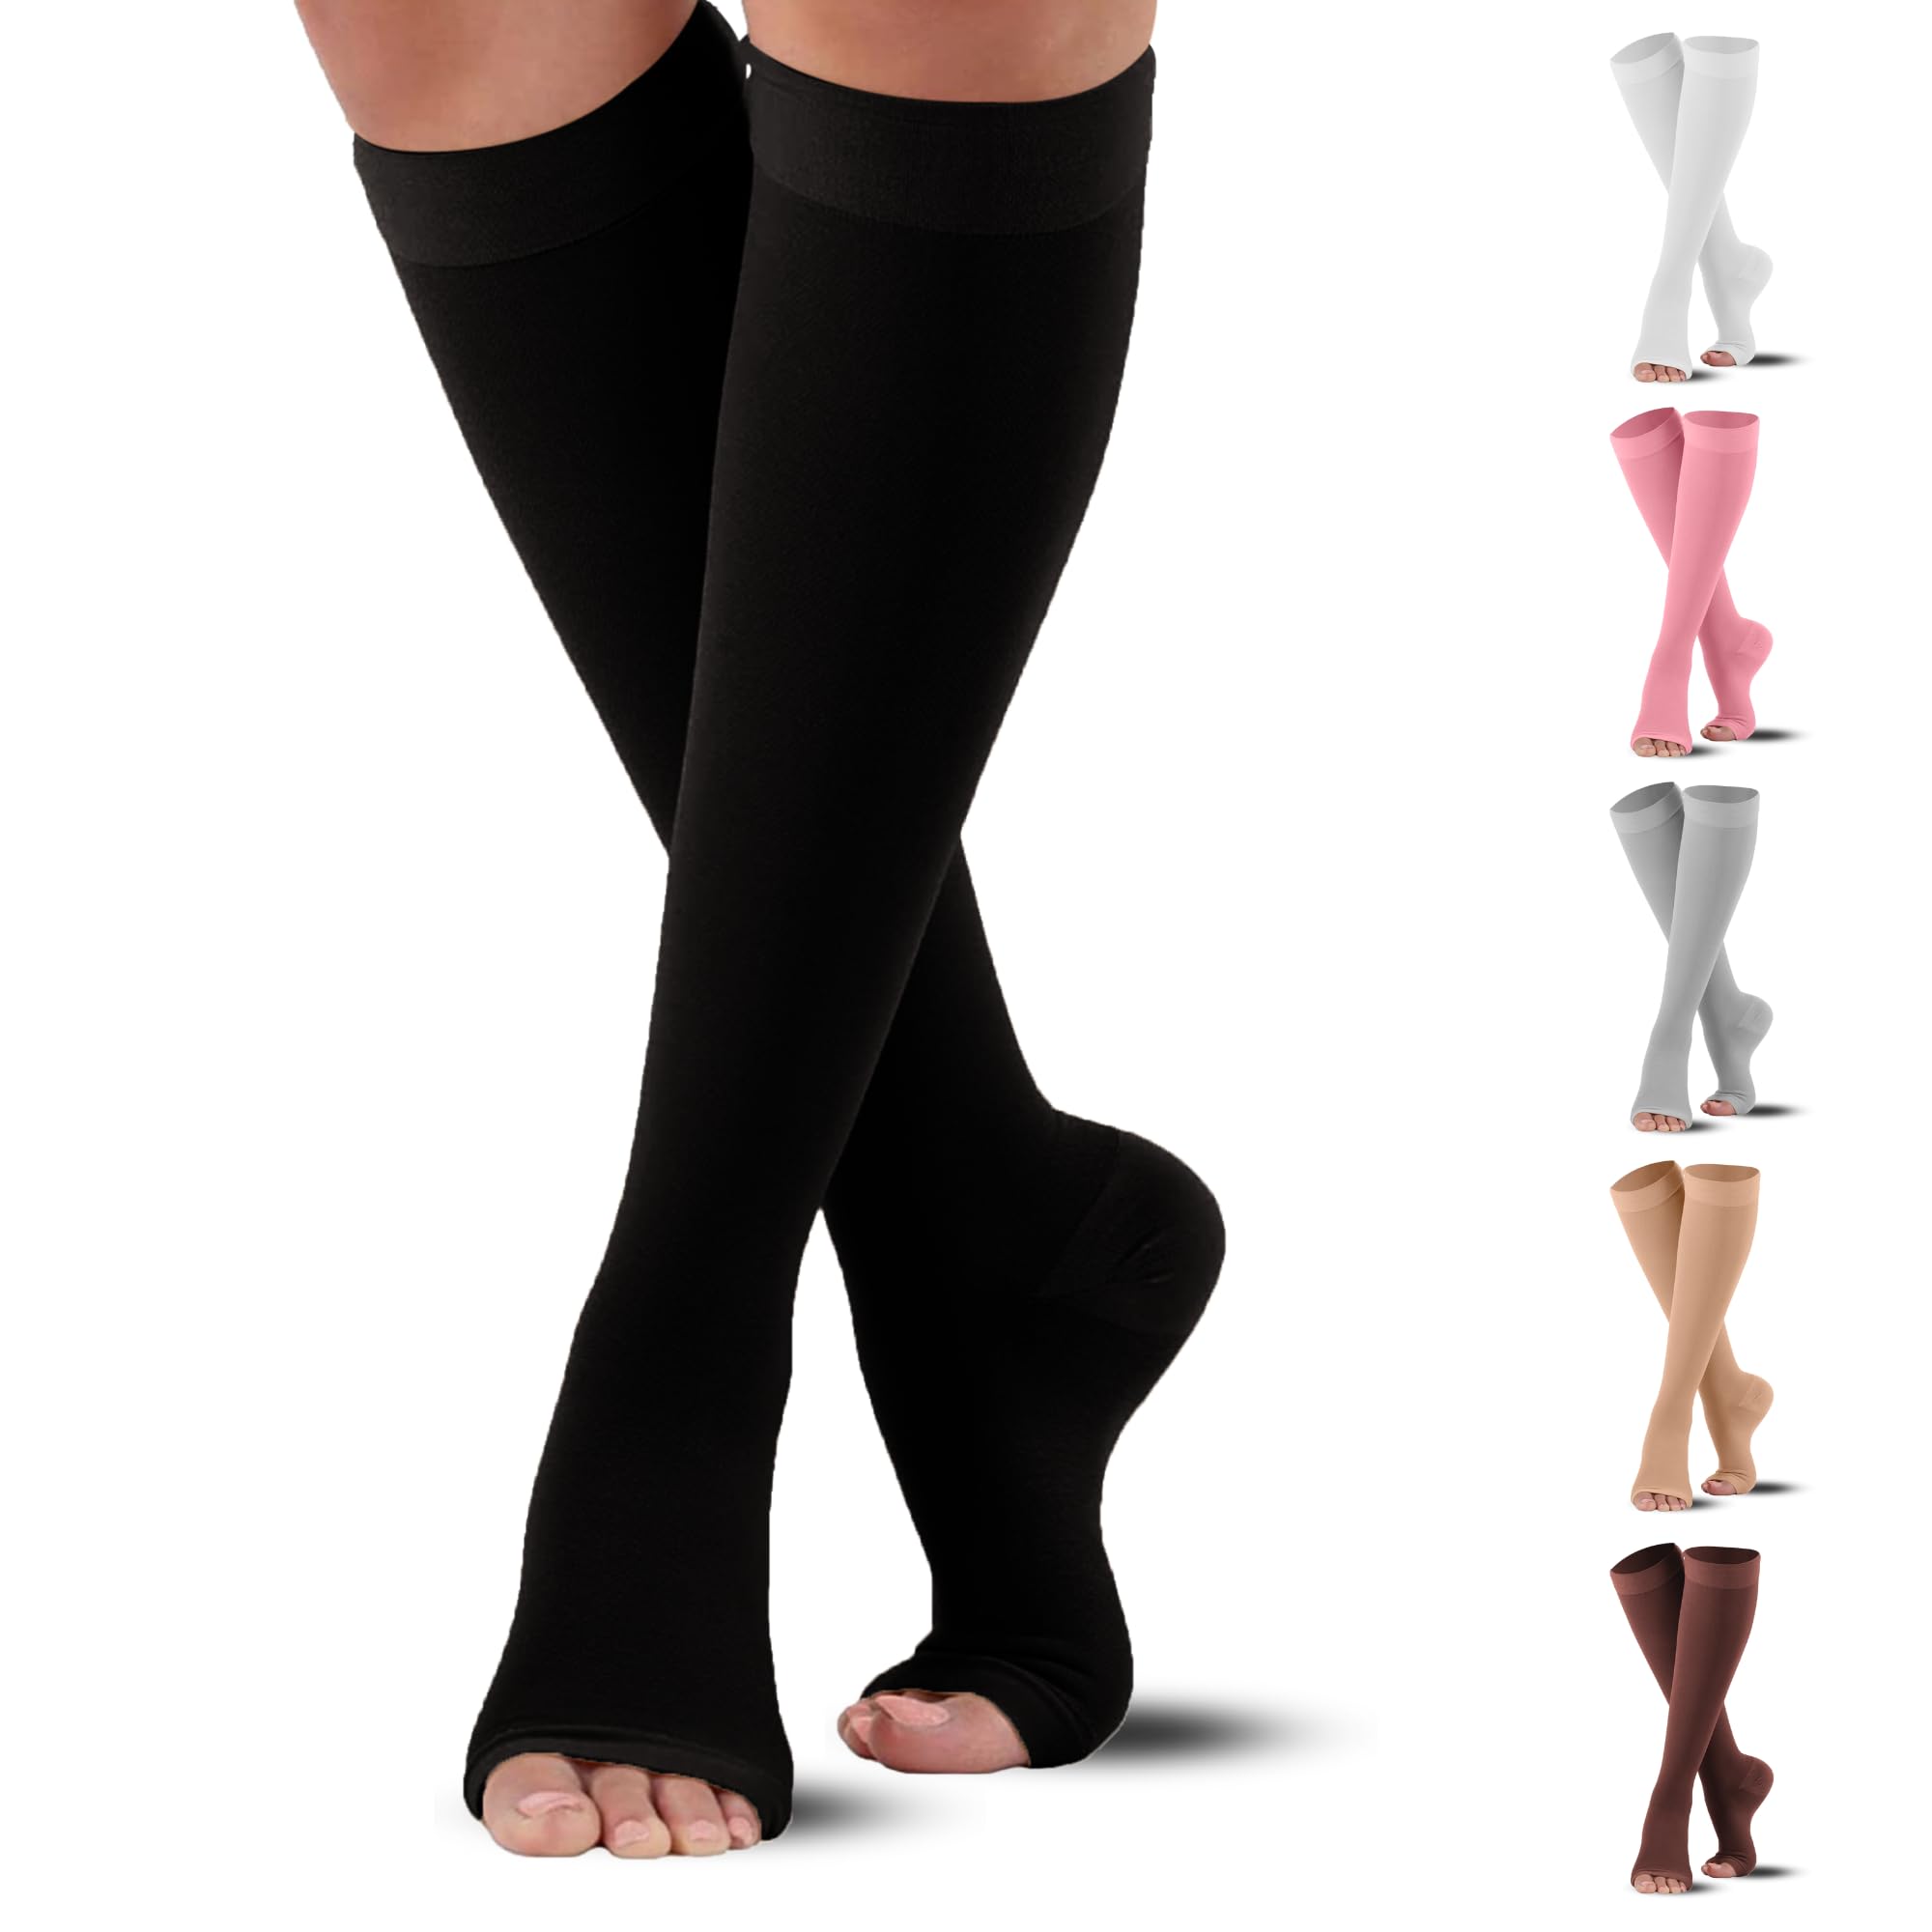 Mojo Compression Socks Made in USA 20-30 mmHg Opaque Knee-High Graduated Compression Stockings for CVI, Swelling, and Spider Vei